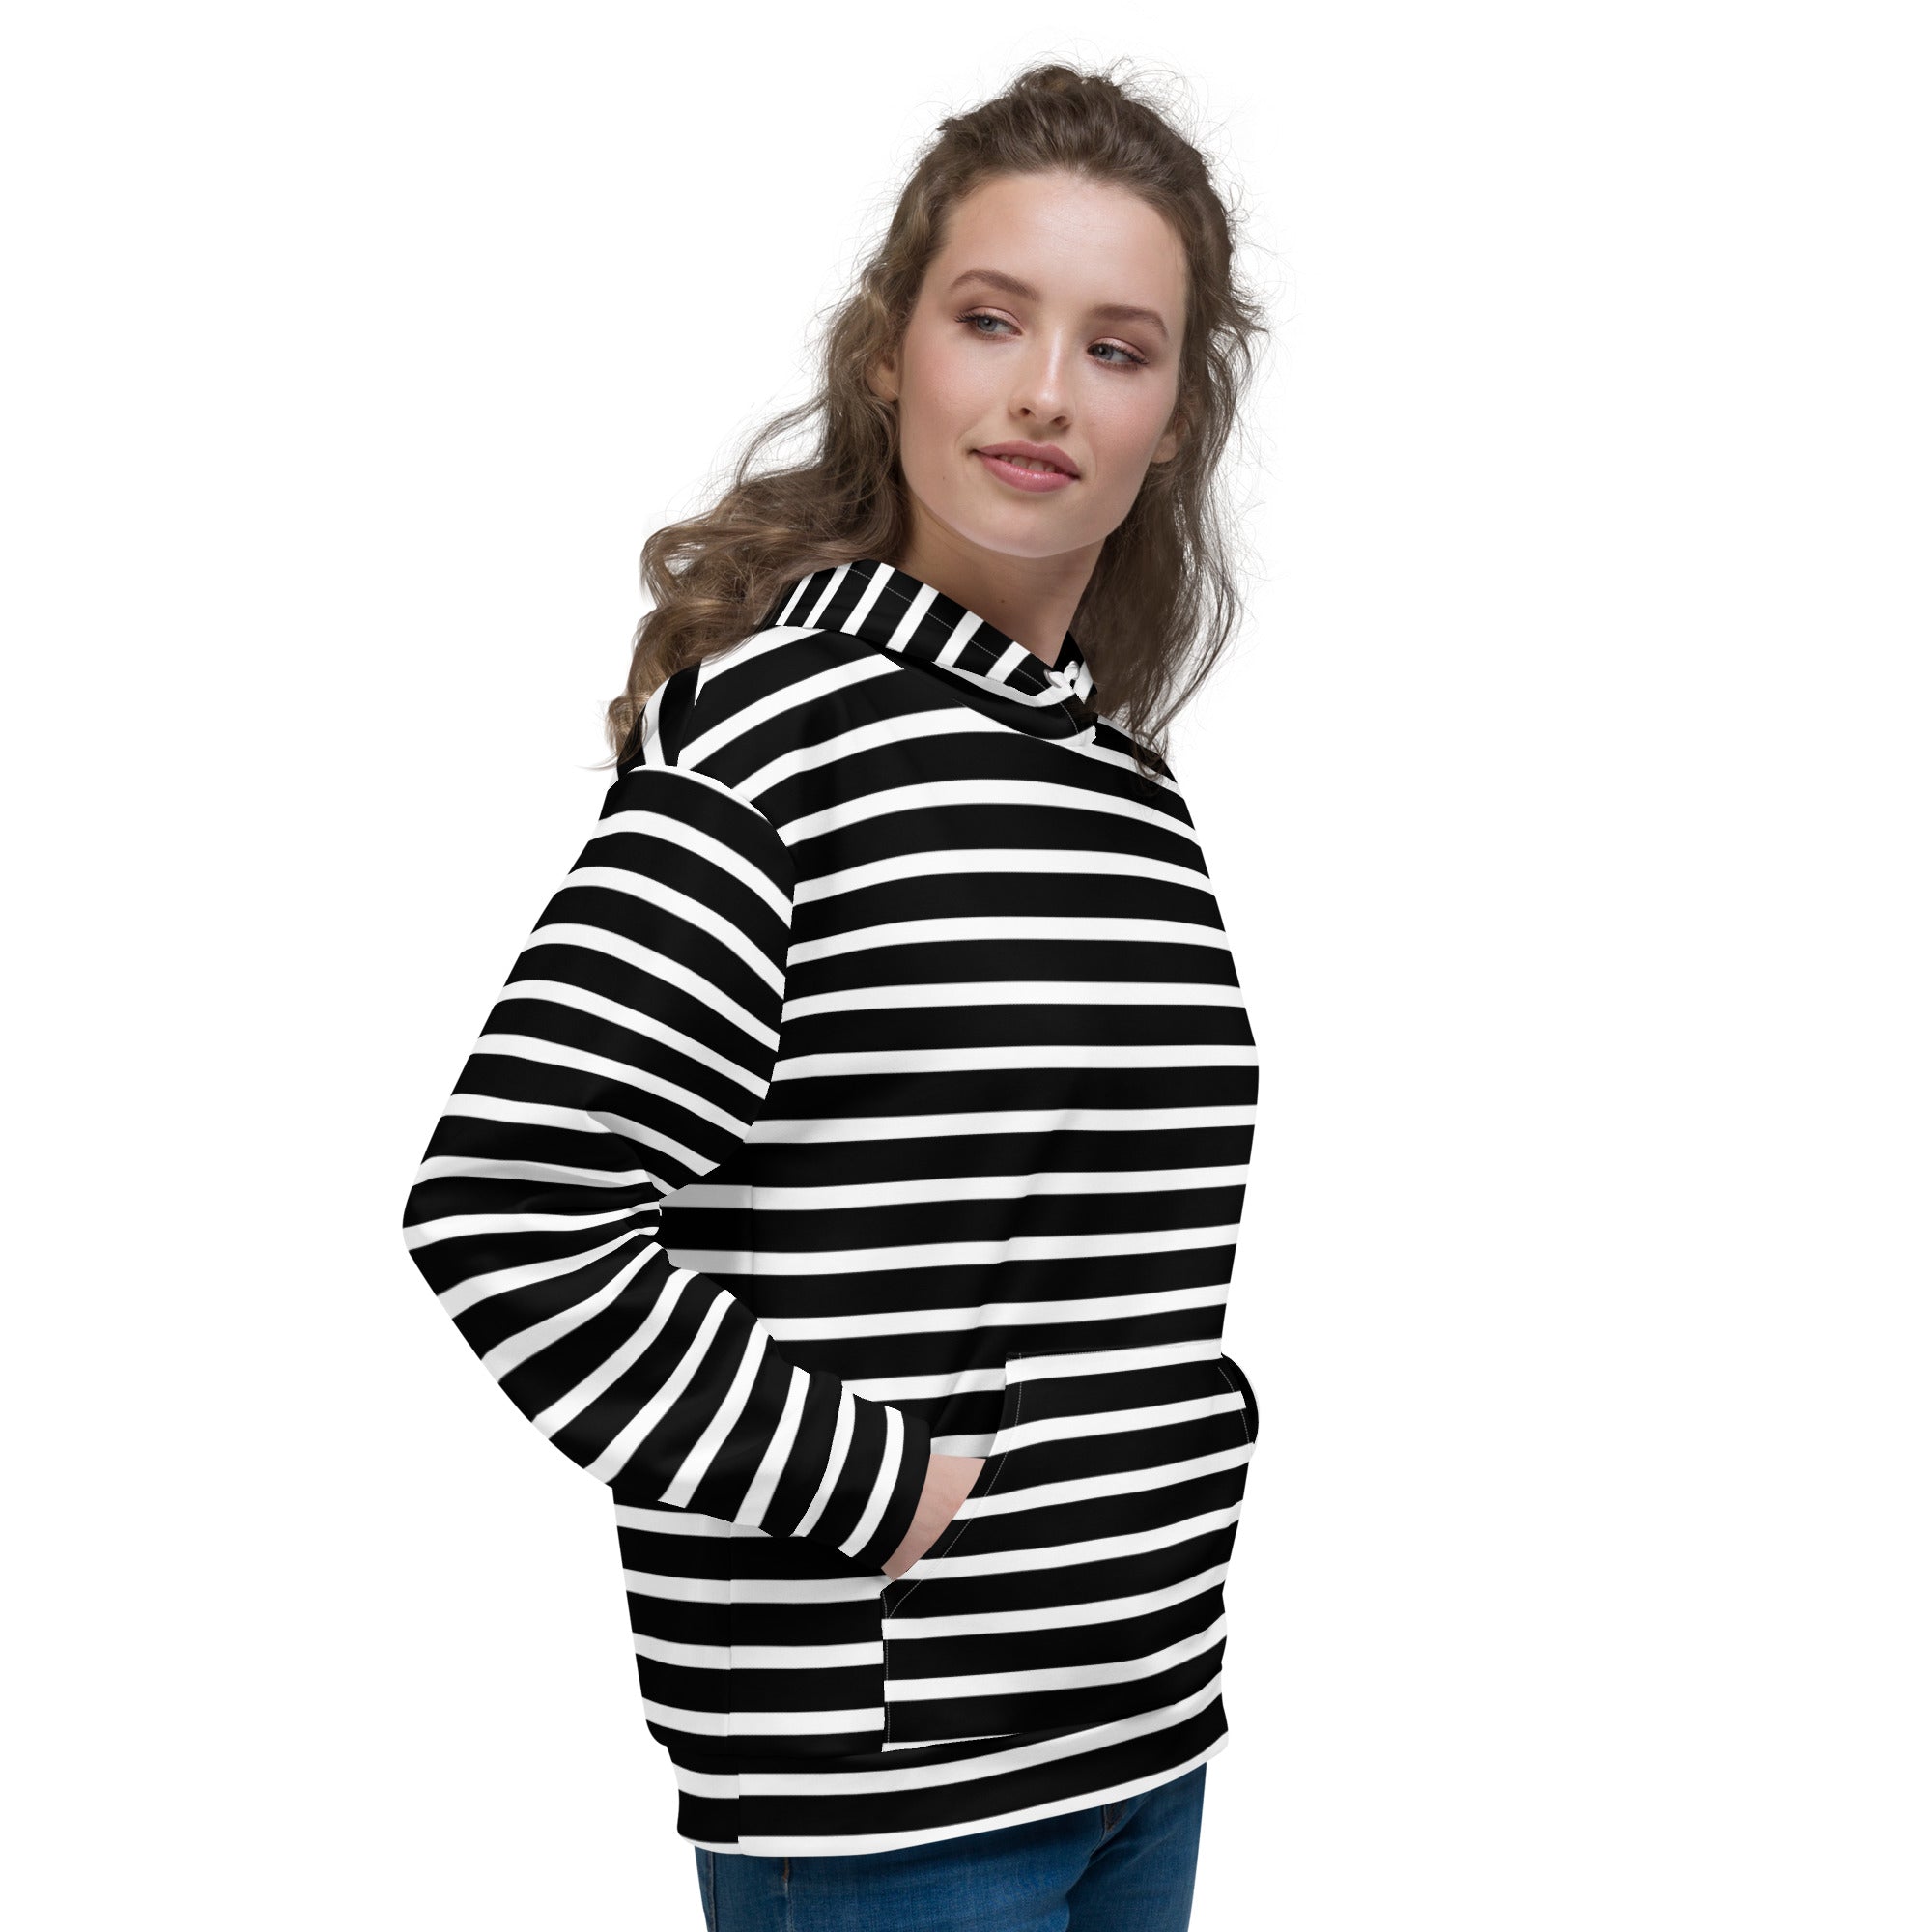 Unisex Hoodie- White and Black Striped